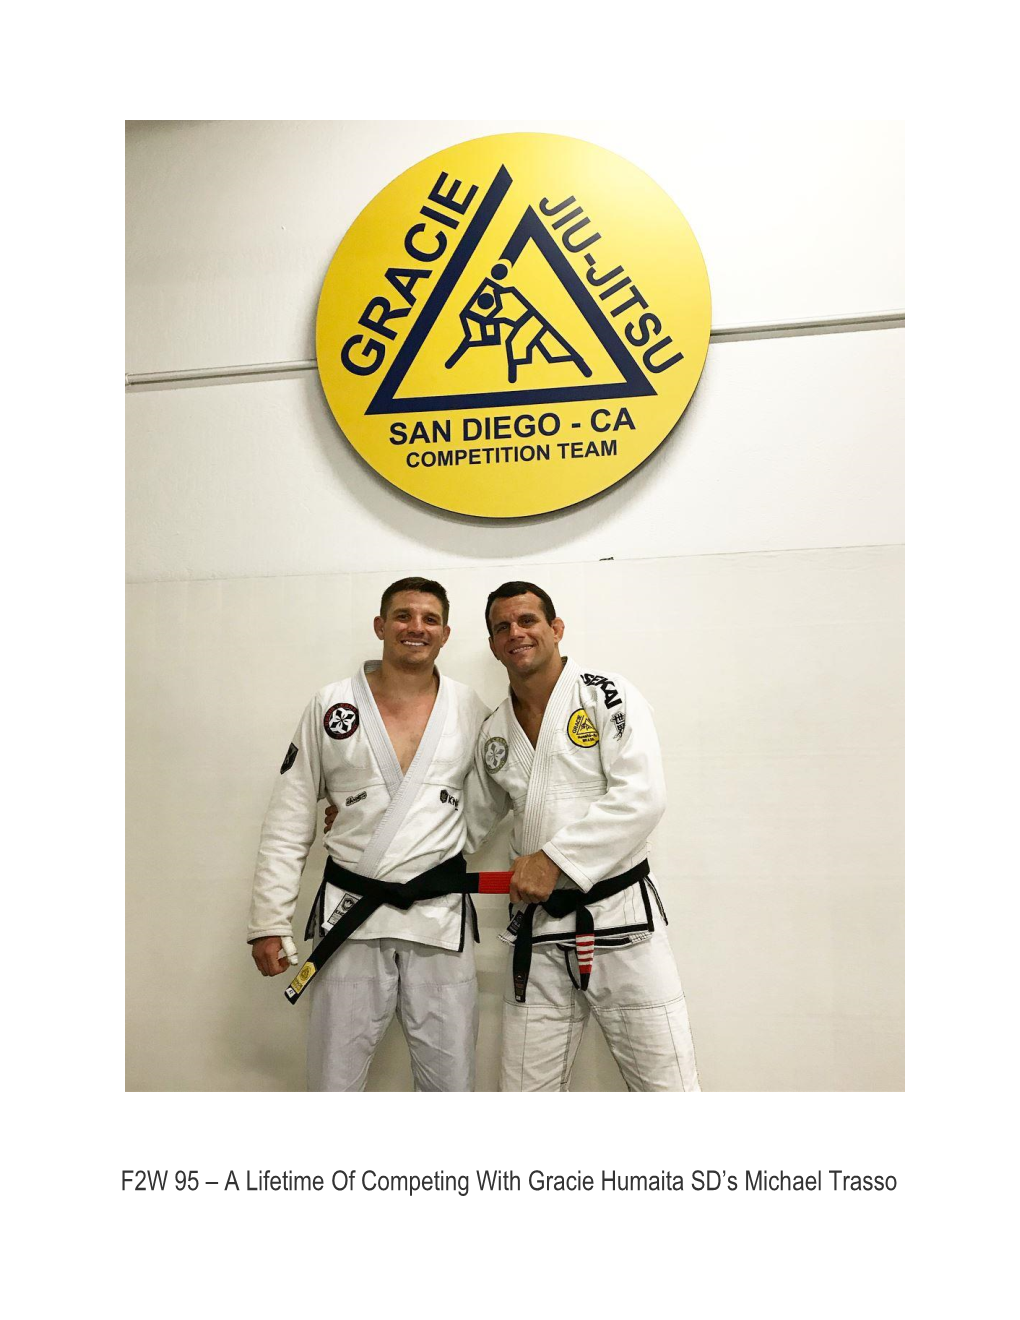 F2W 95 – a Lifetime of Competing with Gracie Humaita SD's Michael